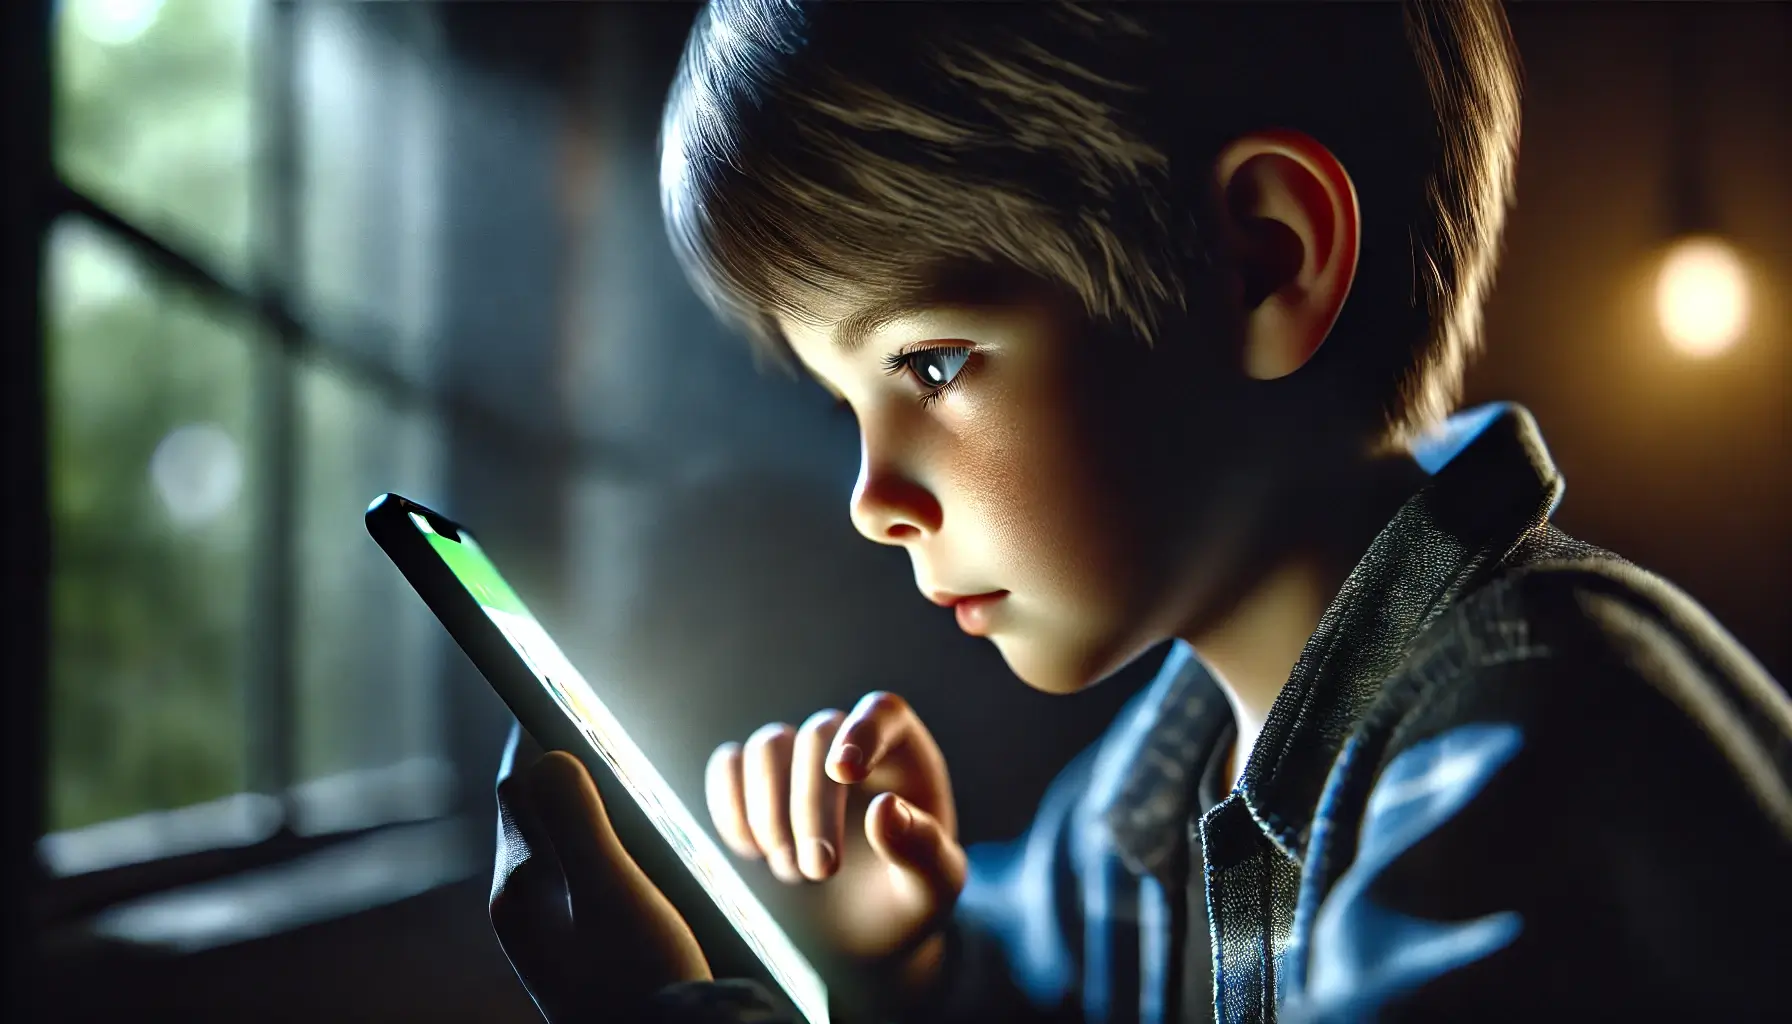 A young boy intensely focused on learning Cybersecurity on his Child-Friendly phone in a dimly lit environment